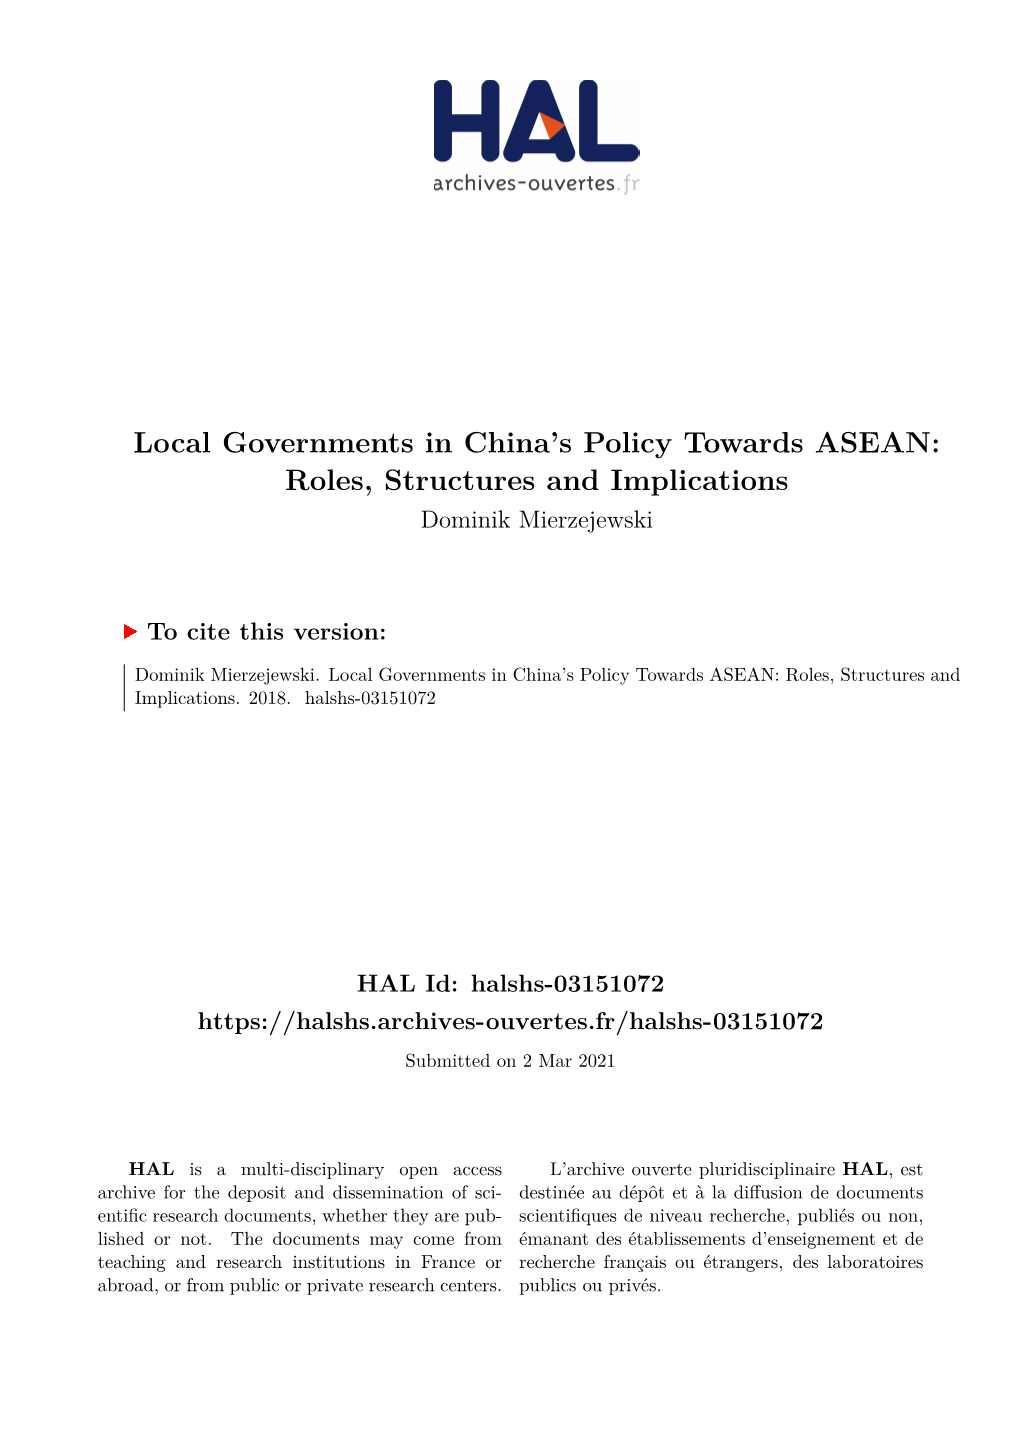 Local Governments in China's Policy Towards ASEAN: Roles, Structures and Implications